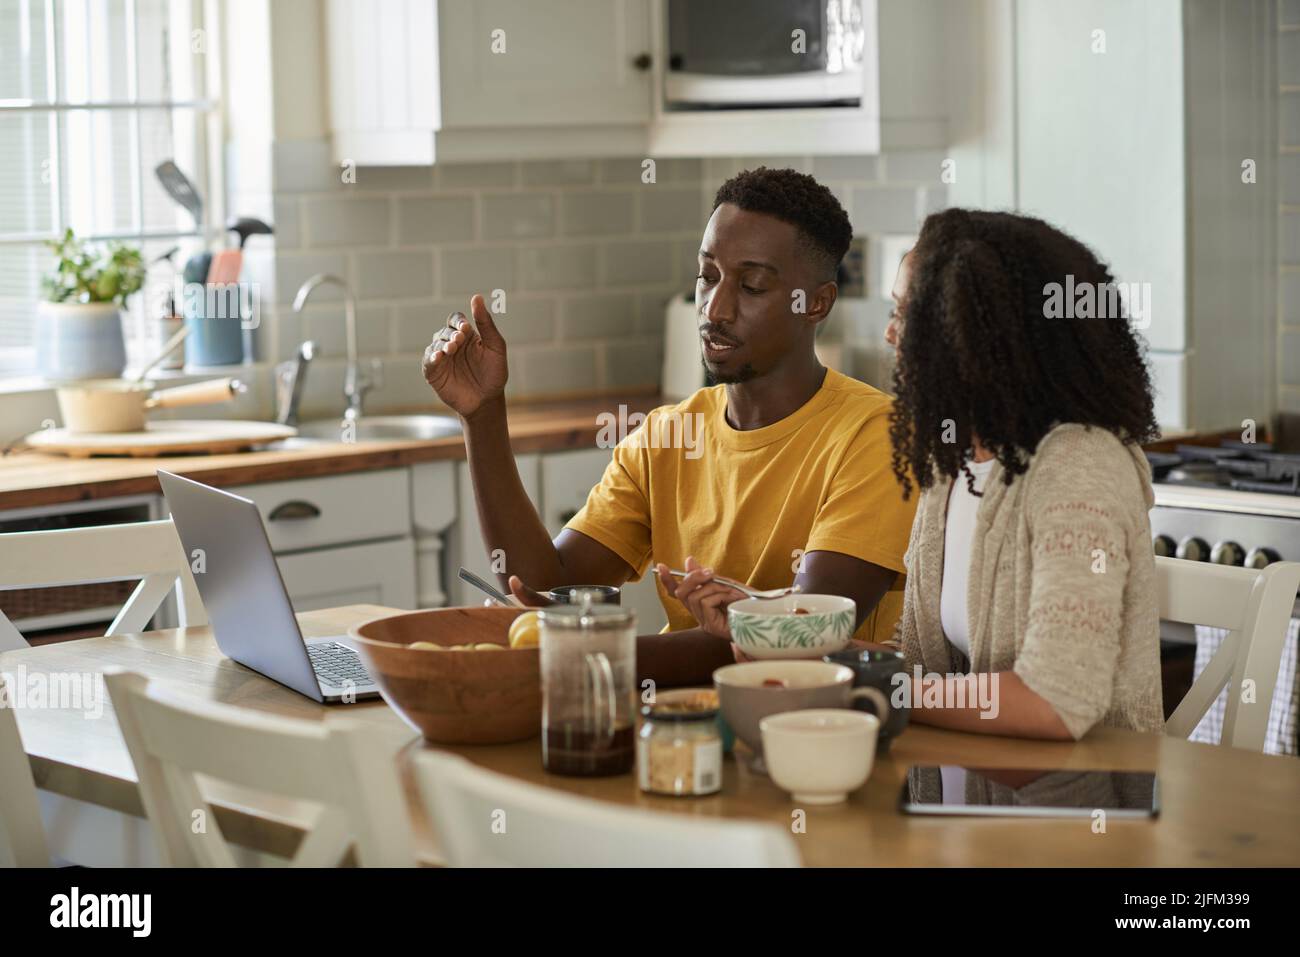 Young multiethnic couple talking and using a laptop at breakfast Stock Photo